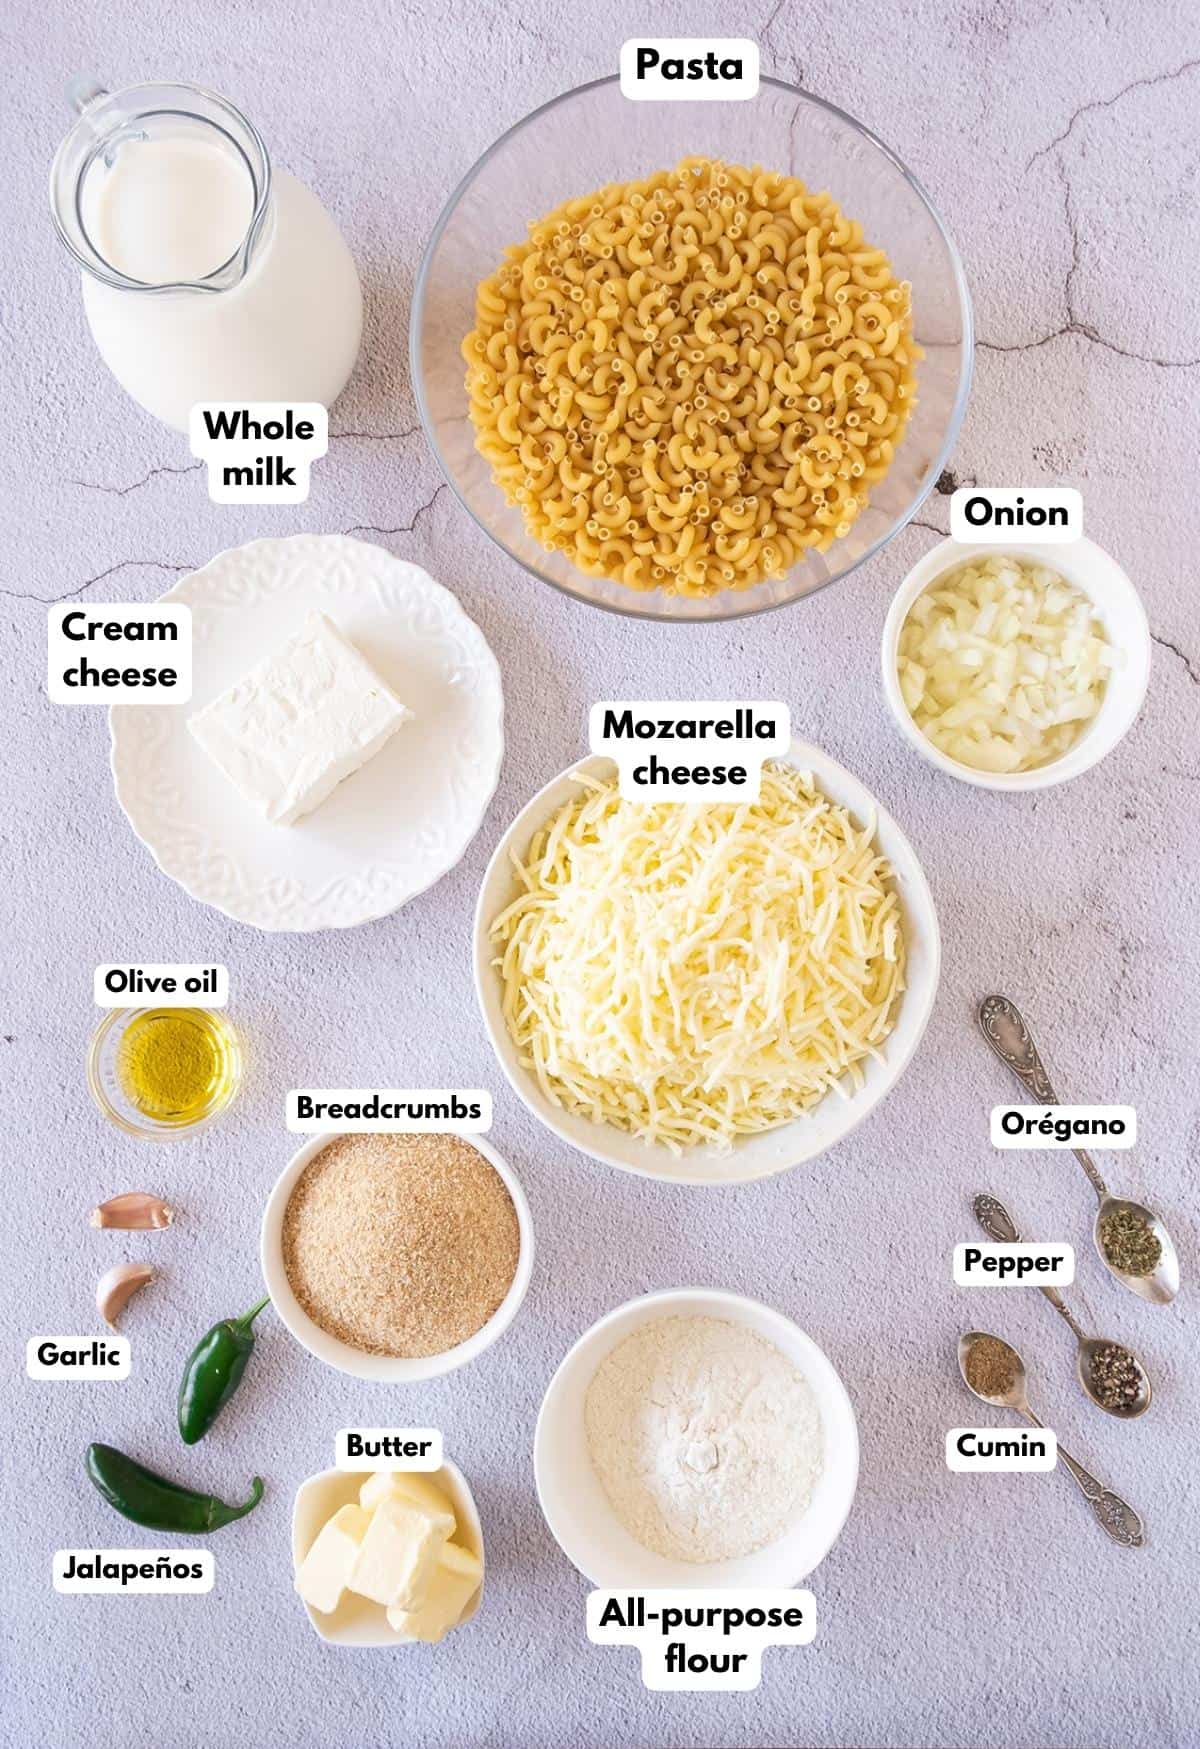 The ingredients needed to make the dish.